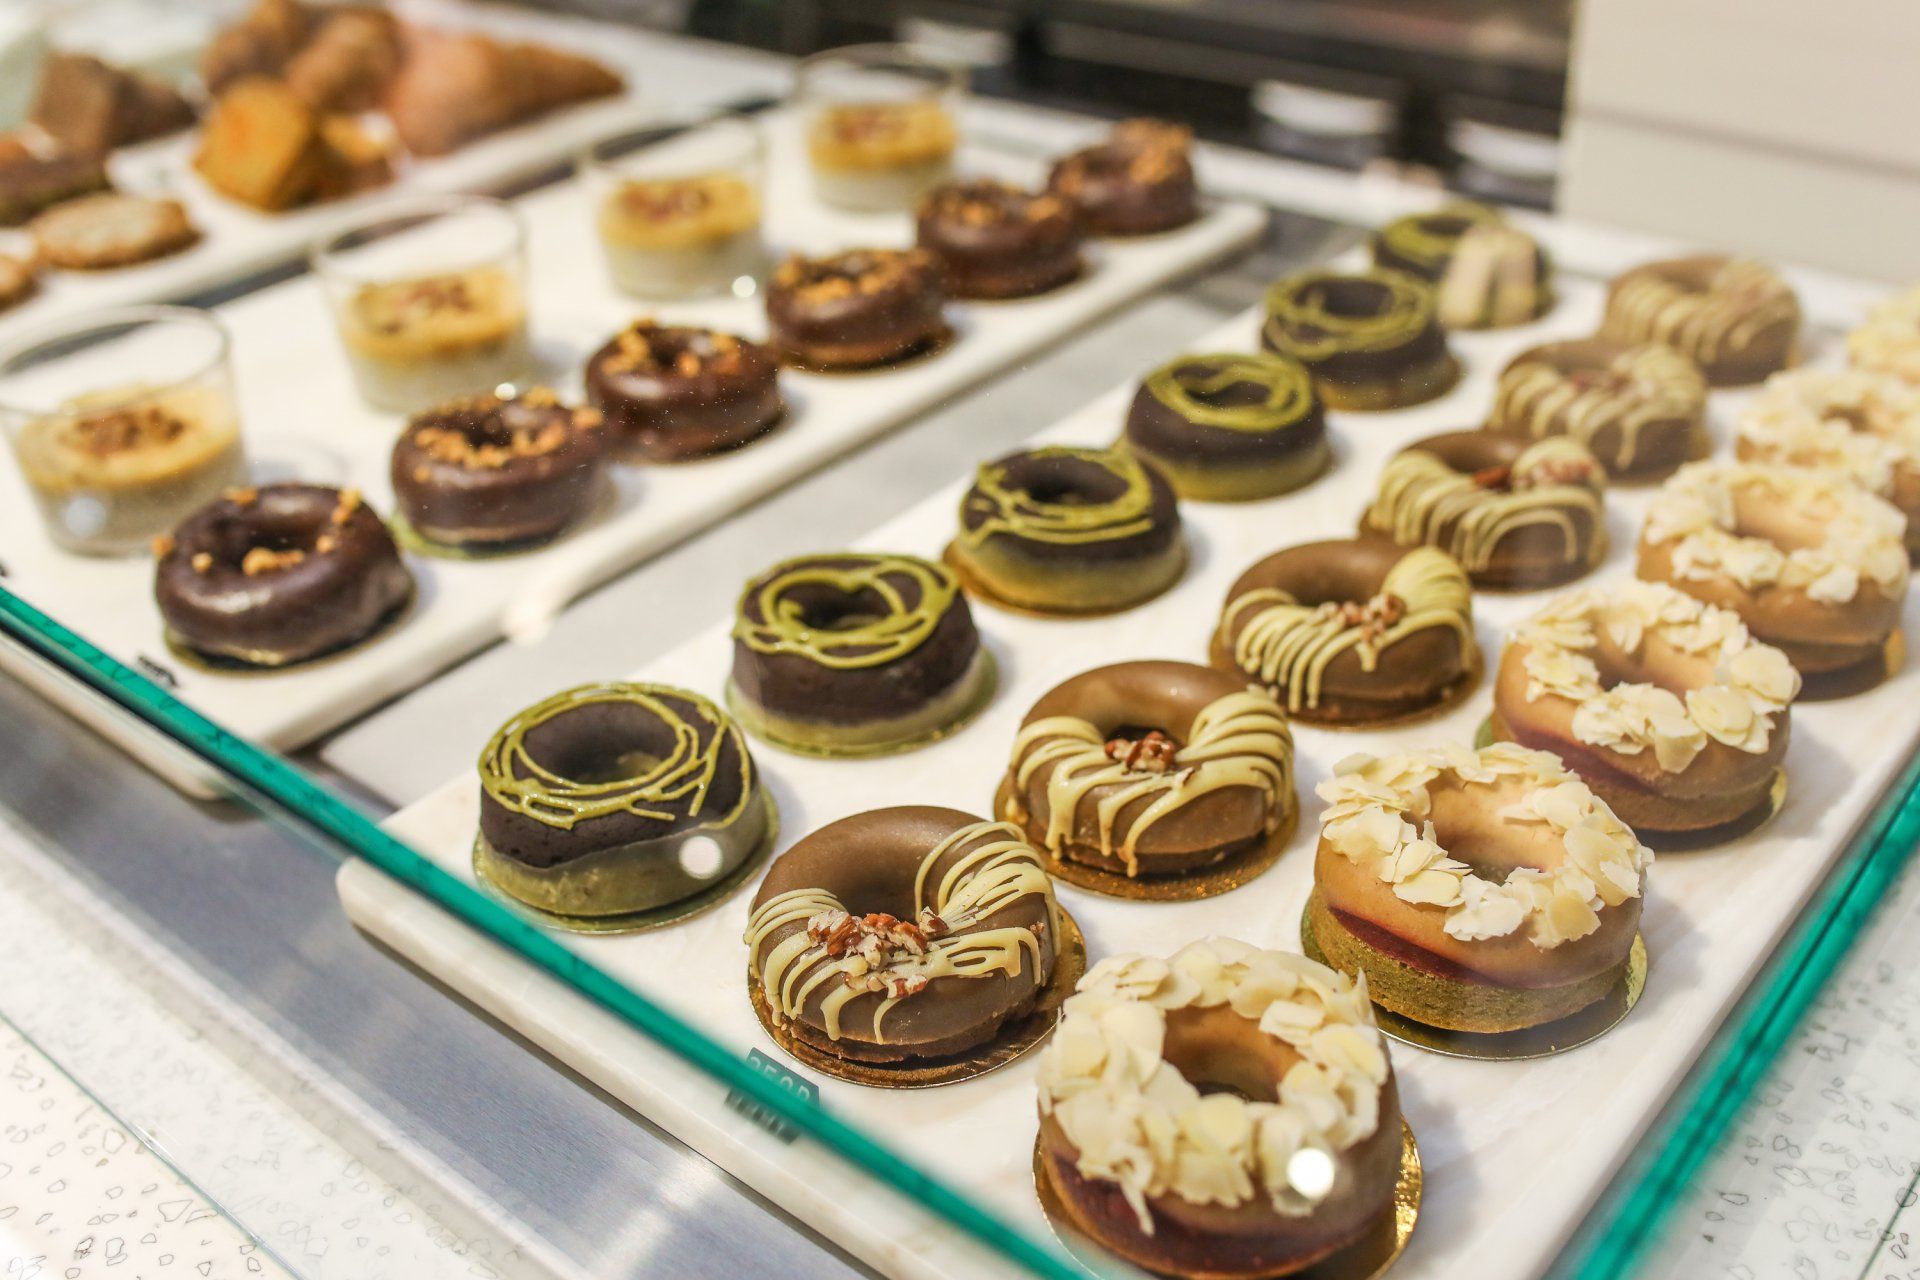 A display case filled with lots of different types of donuts.